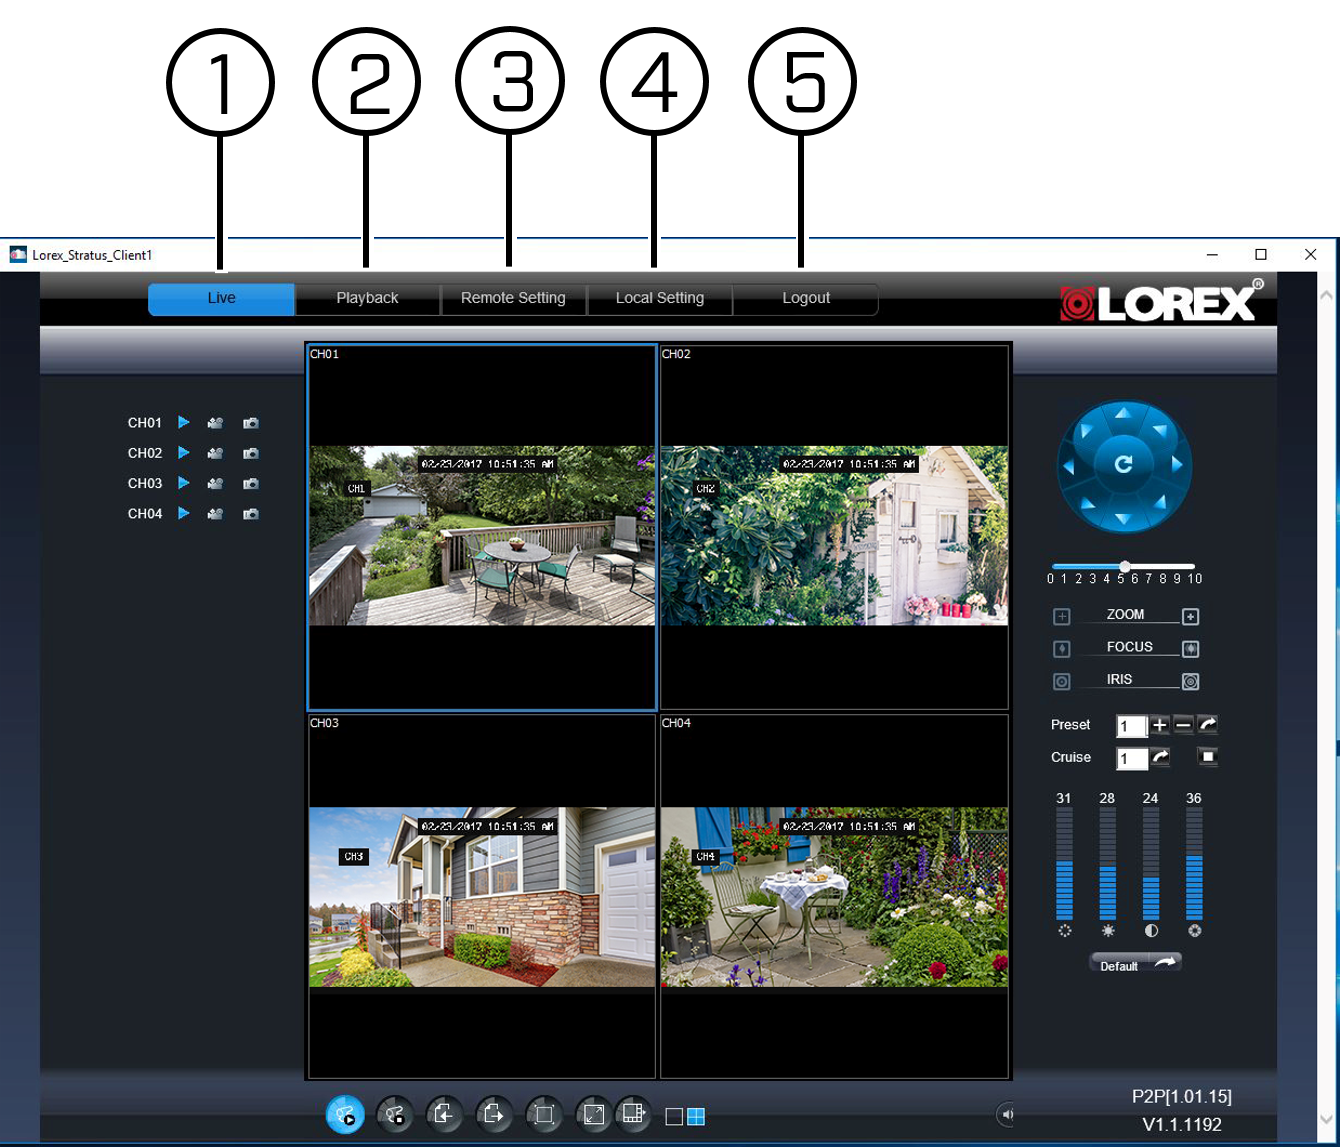 lorex download for pc